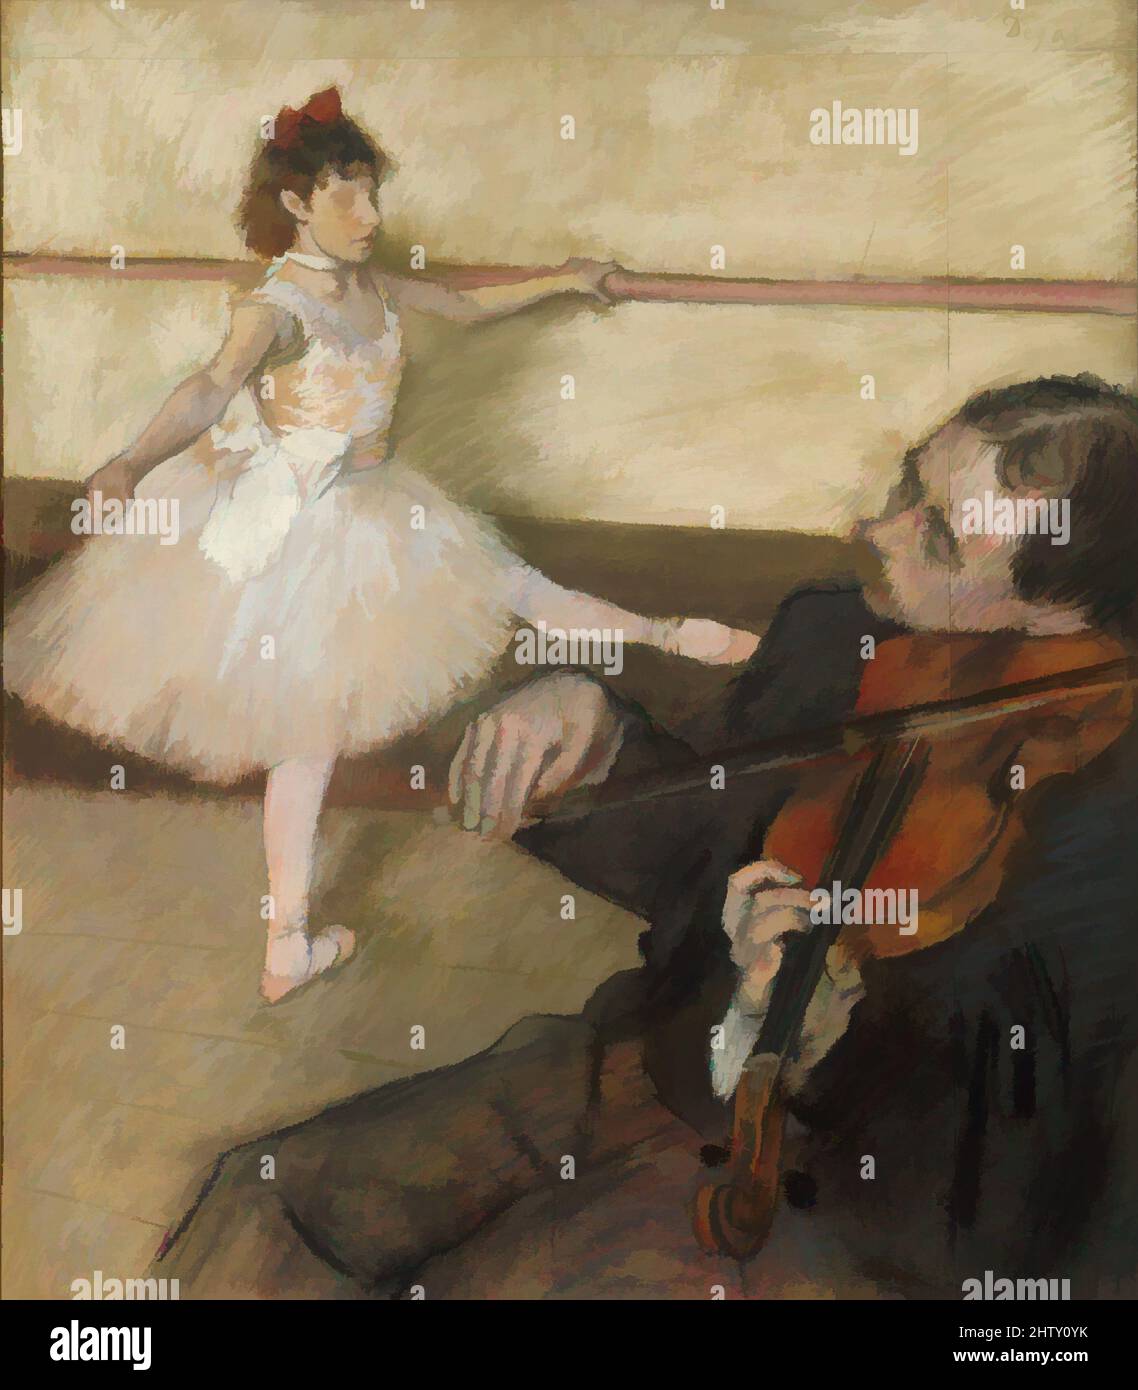 Art inspired by The Dance Lesson, ca. 1879, Pastel and black chalk on three pieces of wove paper, joined together, 25 3/8 x 22 1/8 in. (64.5 x 56.2 cm), Drawings, Edgar Degas (French, Paris 1834–1917 Paris), Degas made various adjustments to this composition, presumably to accommodate, Classic works modernized by Artotop with a splash of modernity. Shapes, color and value, eye-catching visual impact on art. Emotions through freedom of artworks in a contemporary way. A timeless message pursuing a wildly creative new direction. Artists turning to the digital medium and creating the Artotop NFT Stock Photo